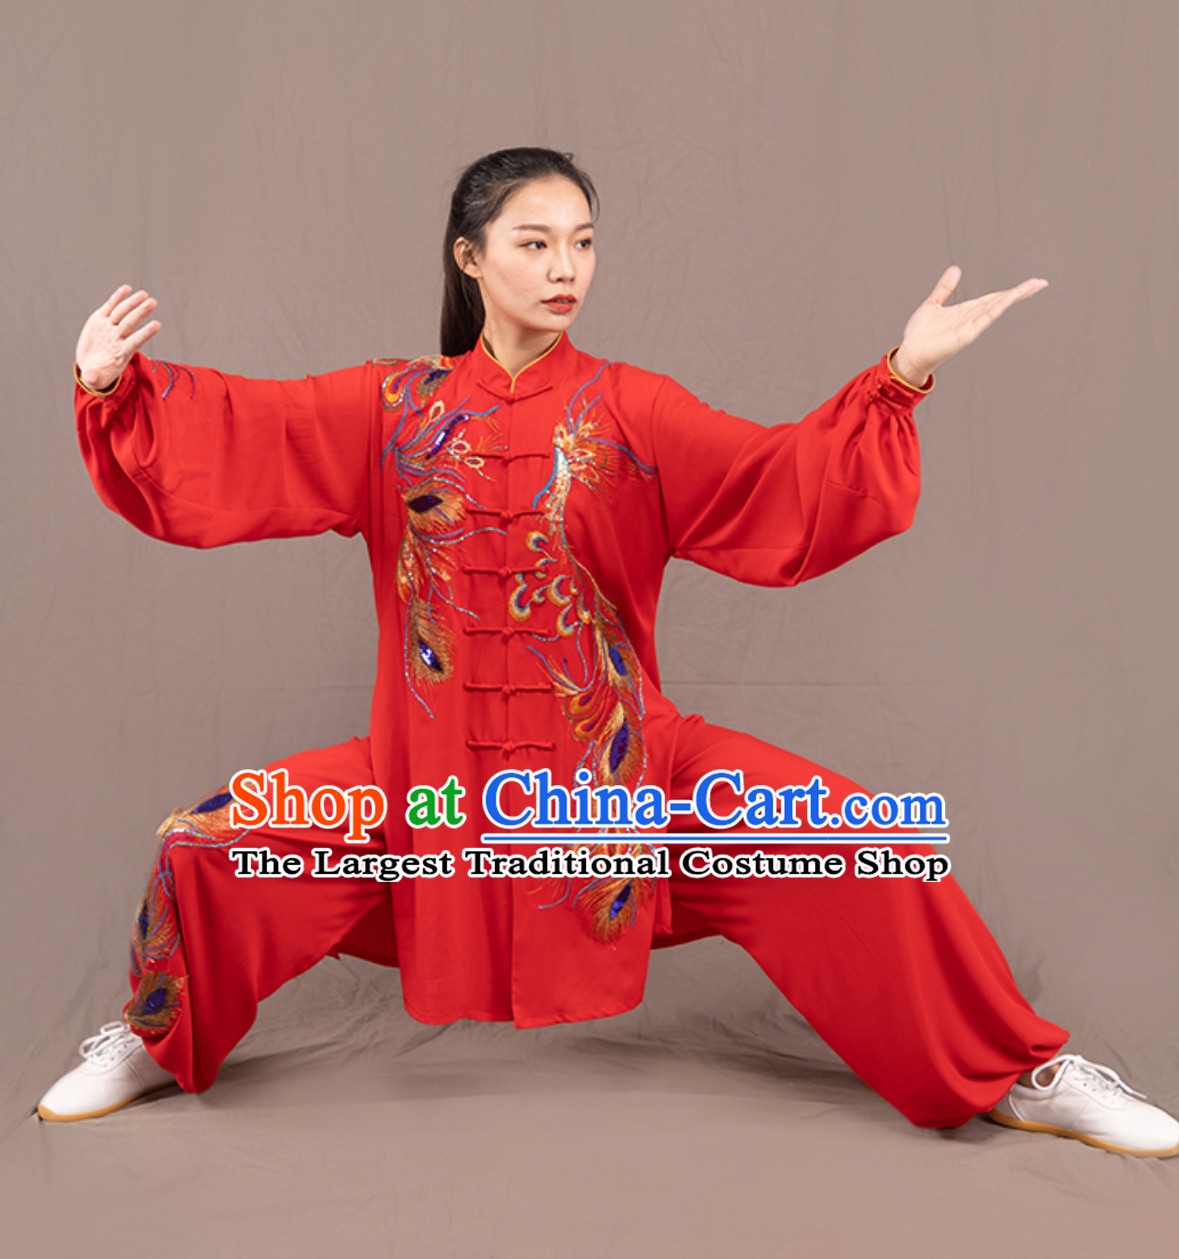 Top Chinese Traditional Competition Championship Professional Tai Chi Uniforms Taiji Kung Fu Wing Chun Kungfu Tai Ji Sword Gong Fu Master Clothing Suits Clothes Complete Set for Women